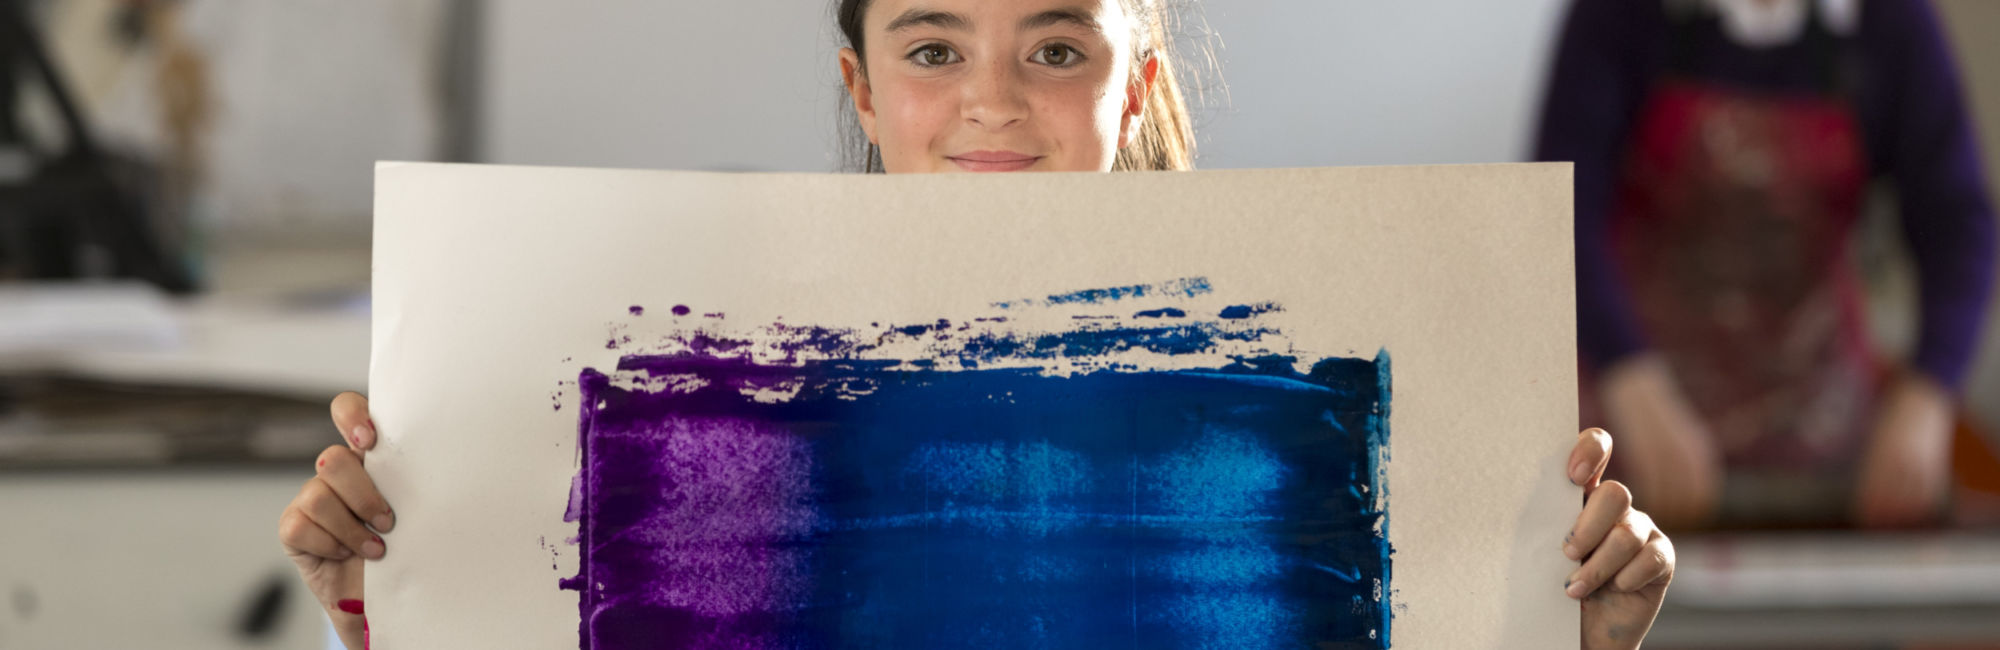 wycliffe pupil holding a painting